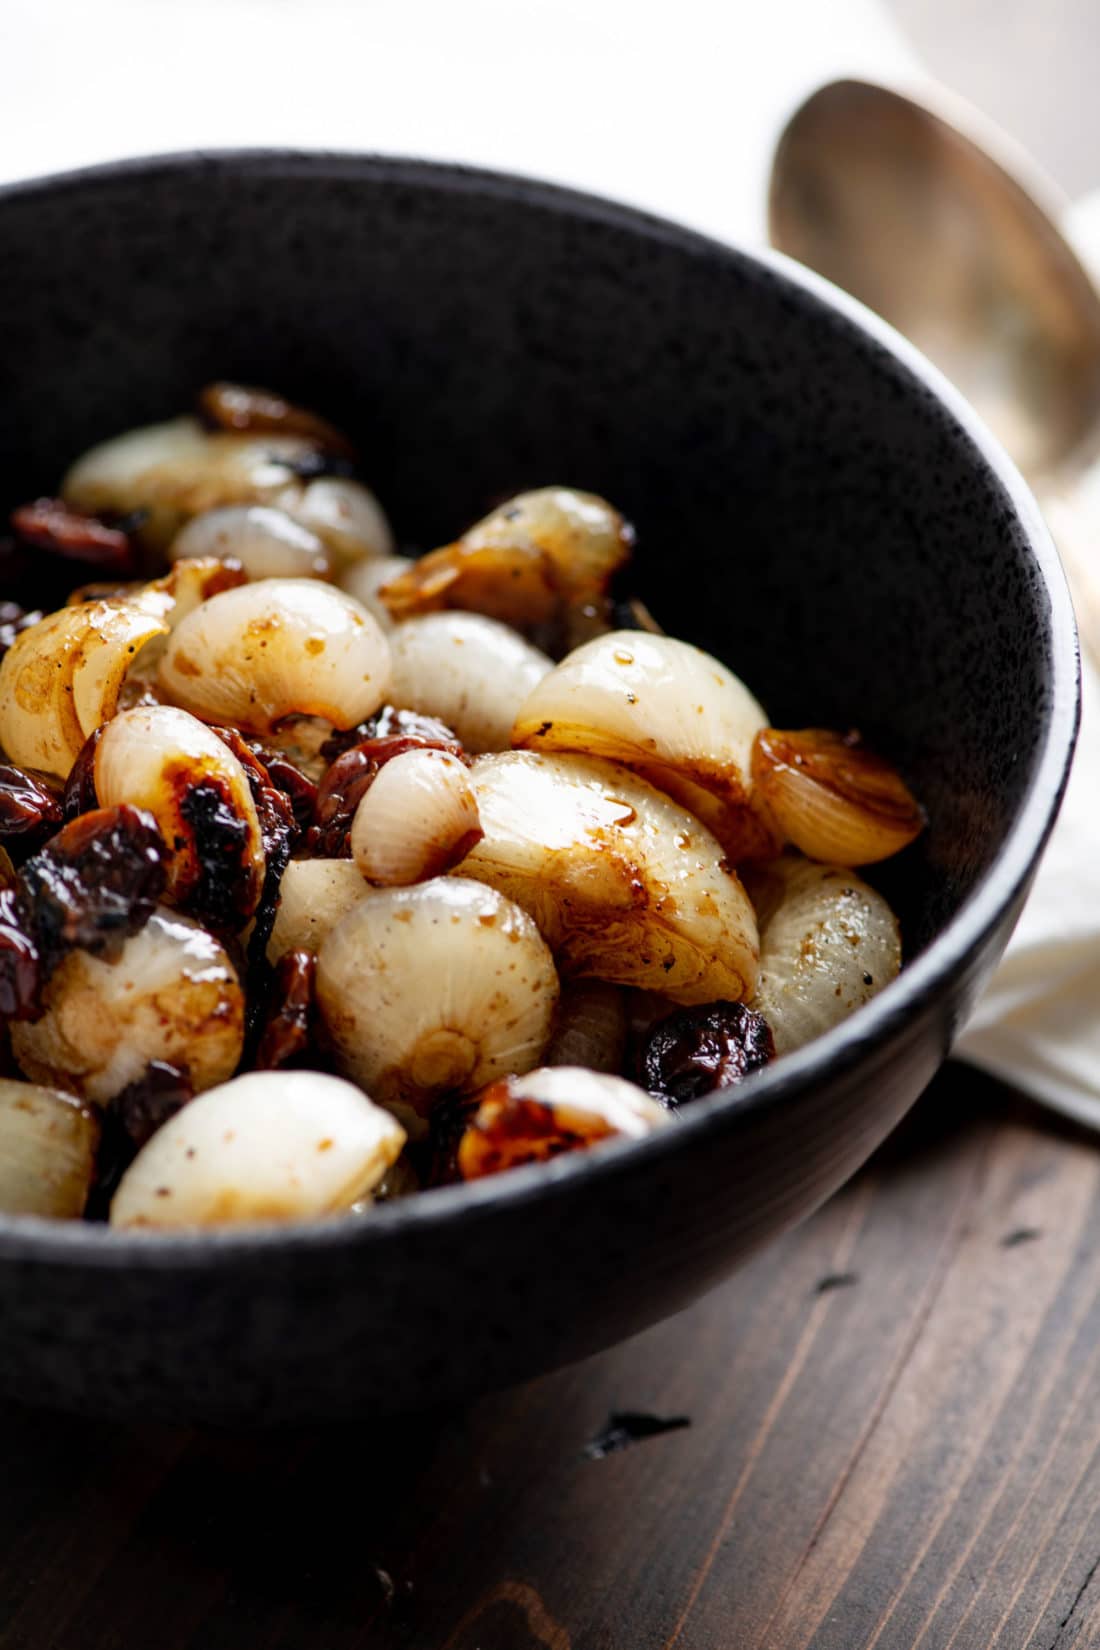 Braised Cipollini Onions with Dried Cherries in a black bowl.